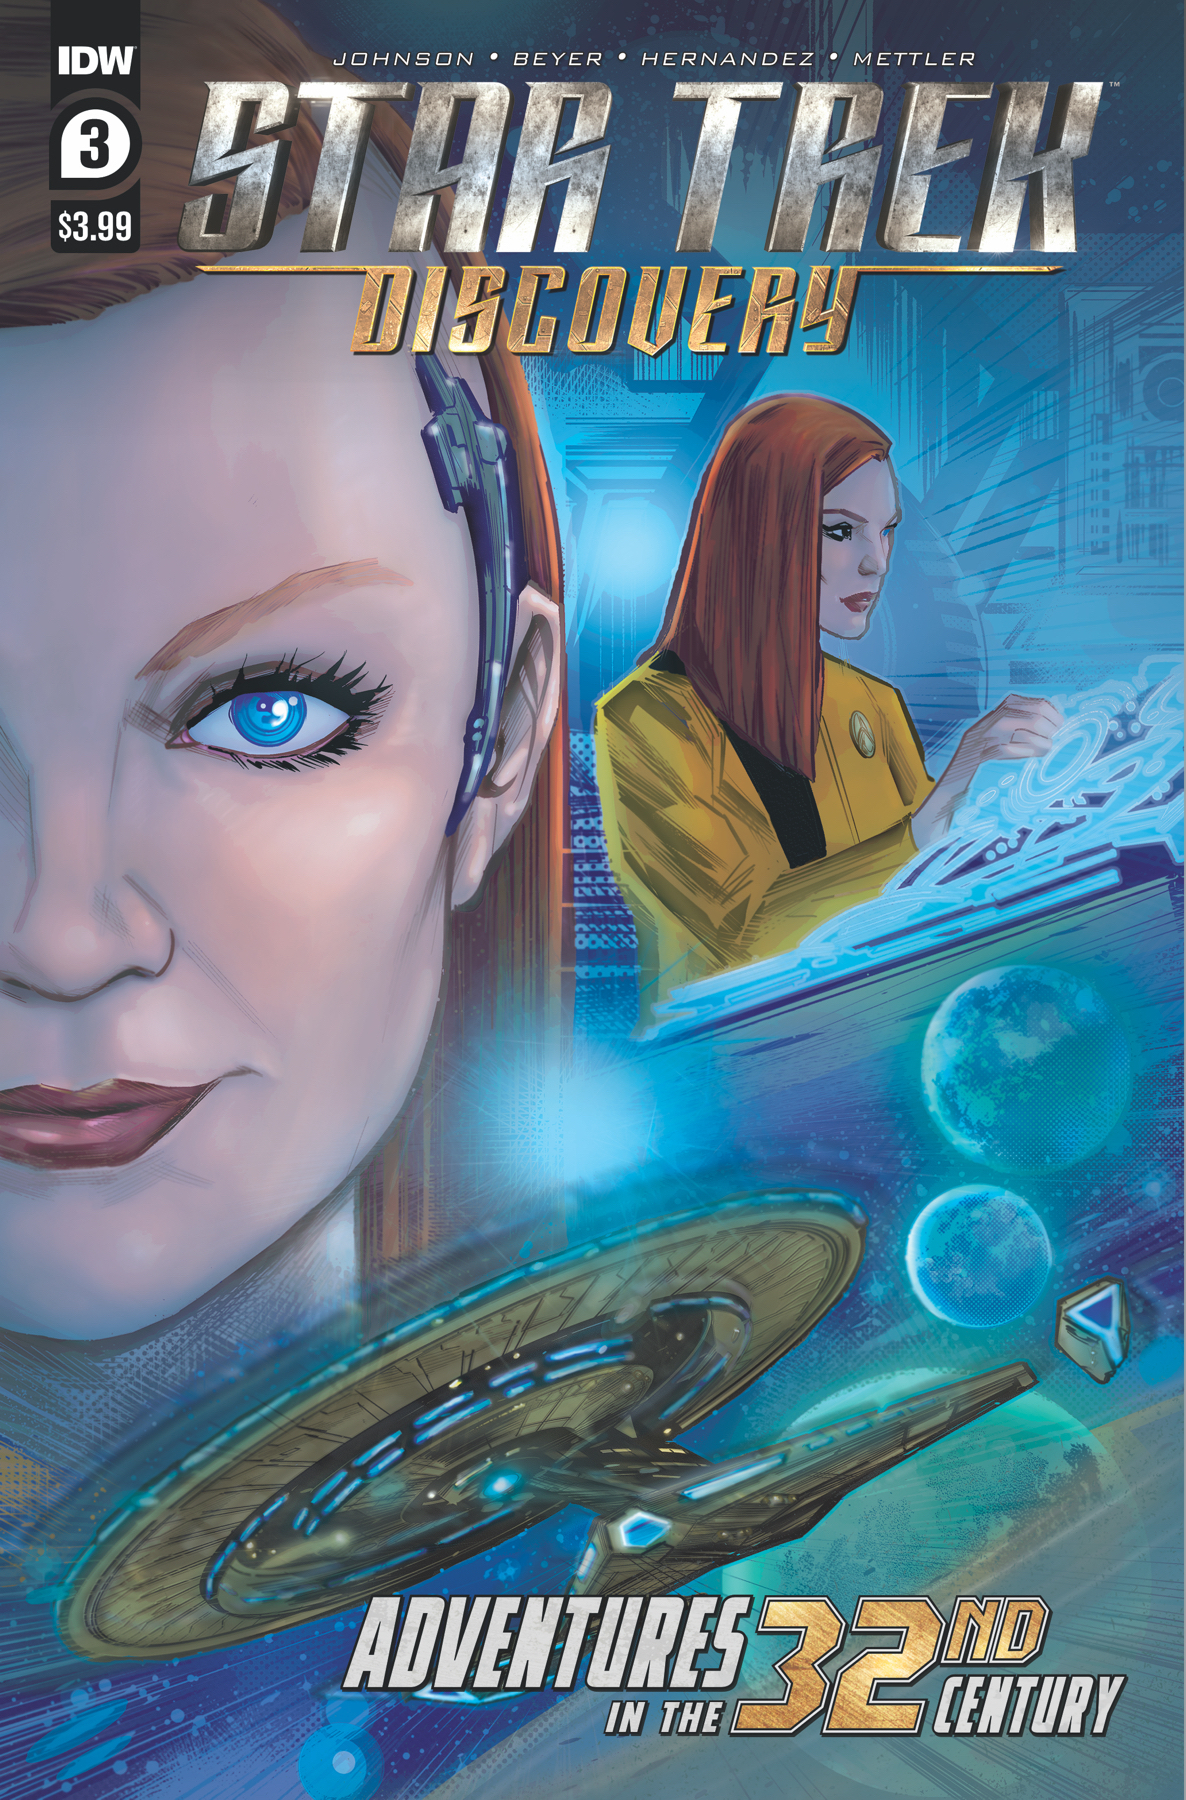 Star Trek Discovery Adventure In 32nd Century #3 Cover A Hernandez (Of 4)